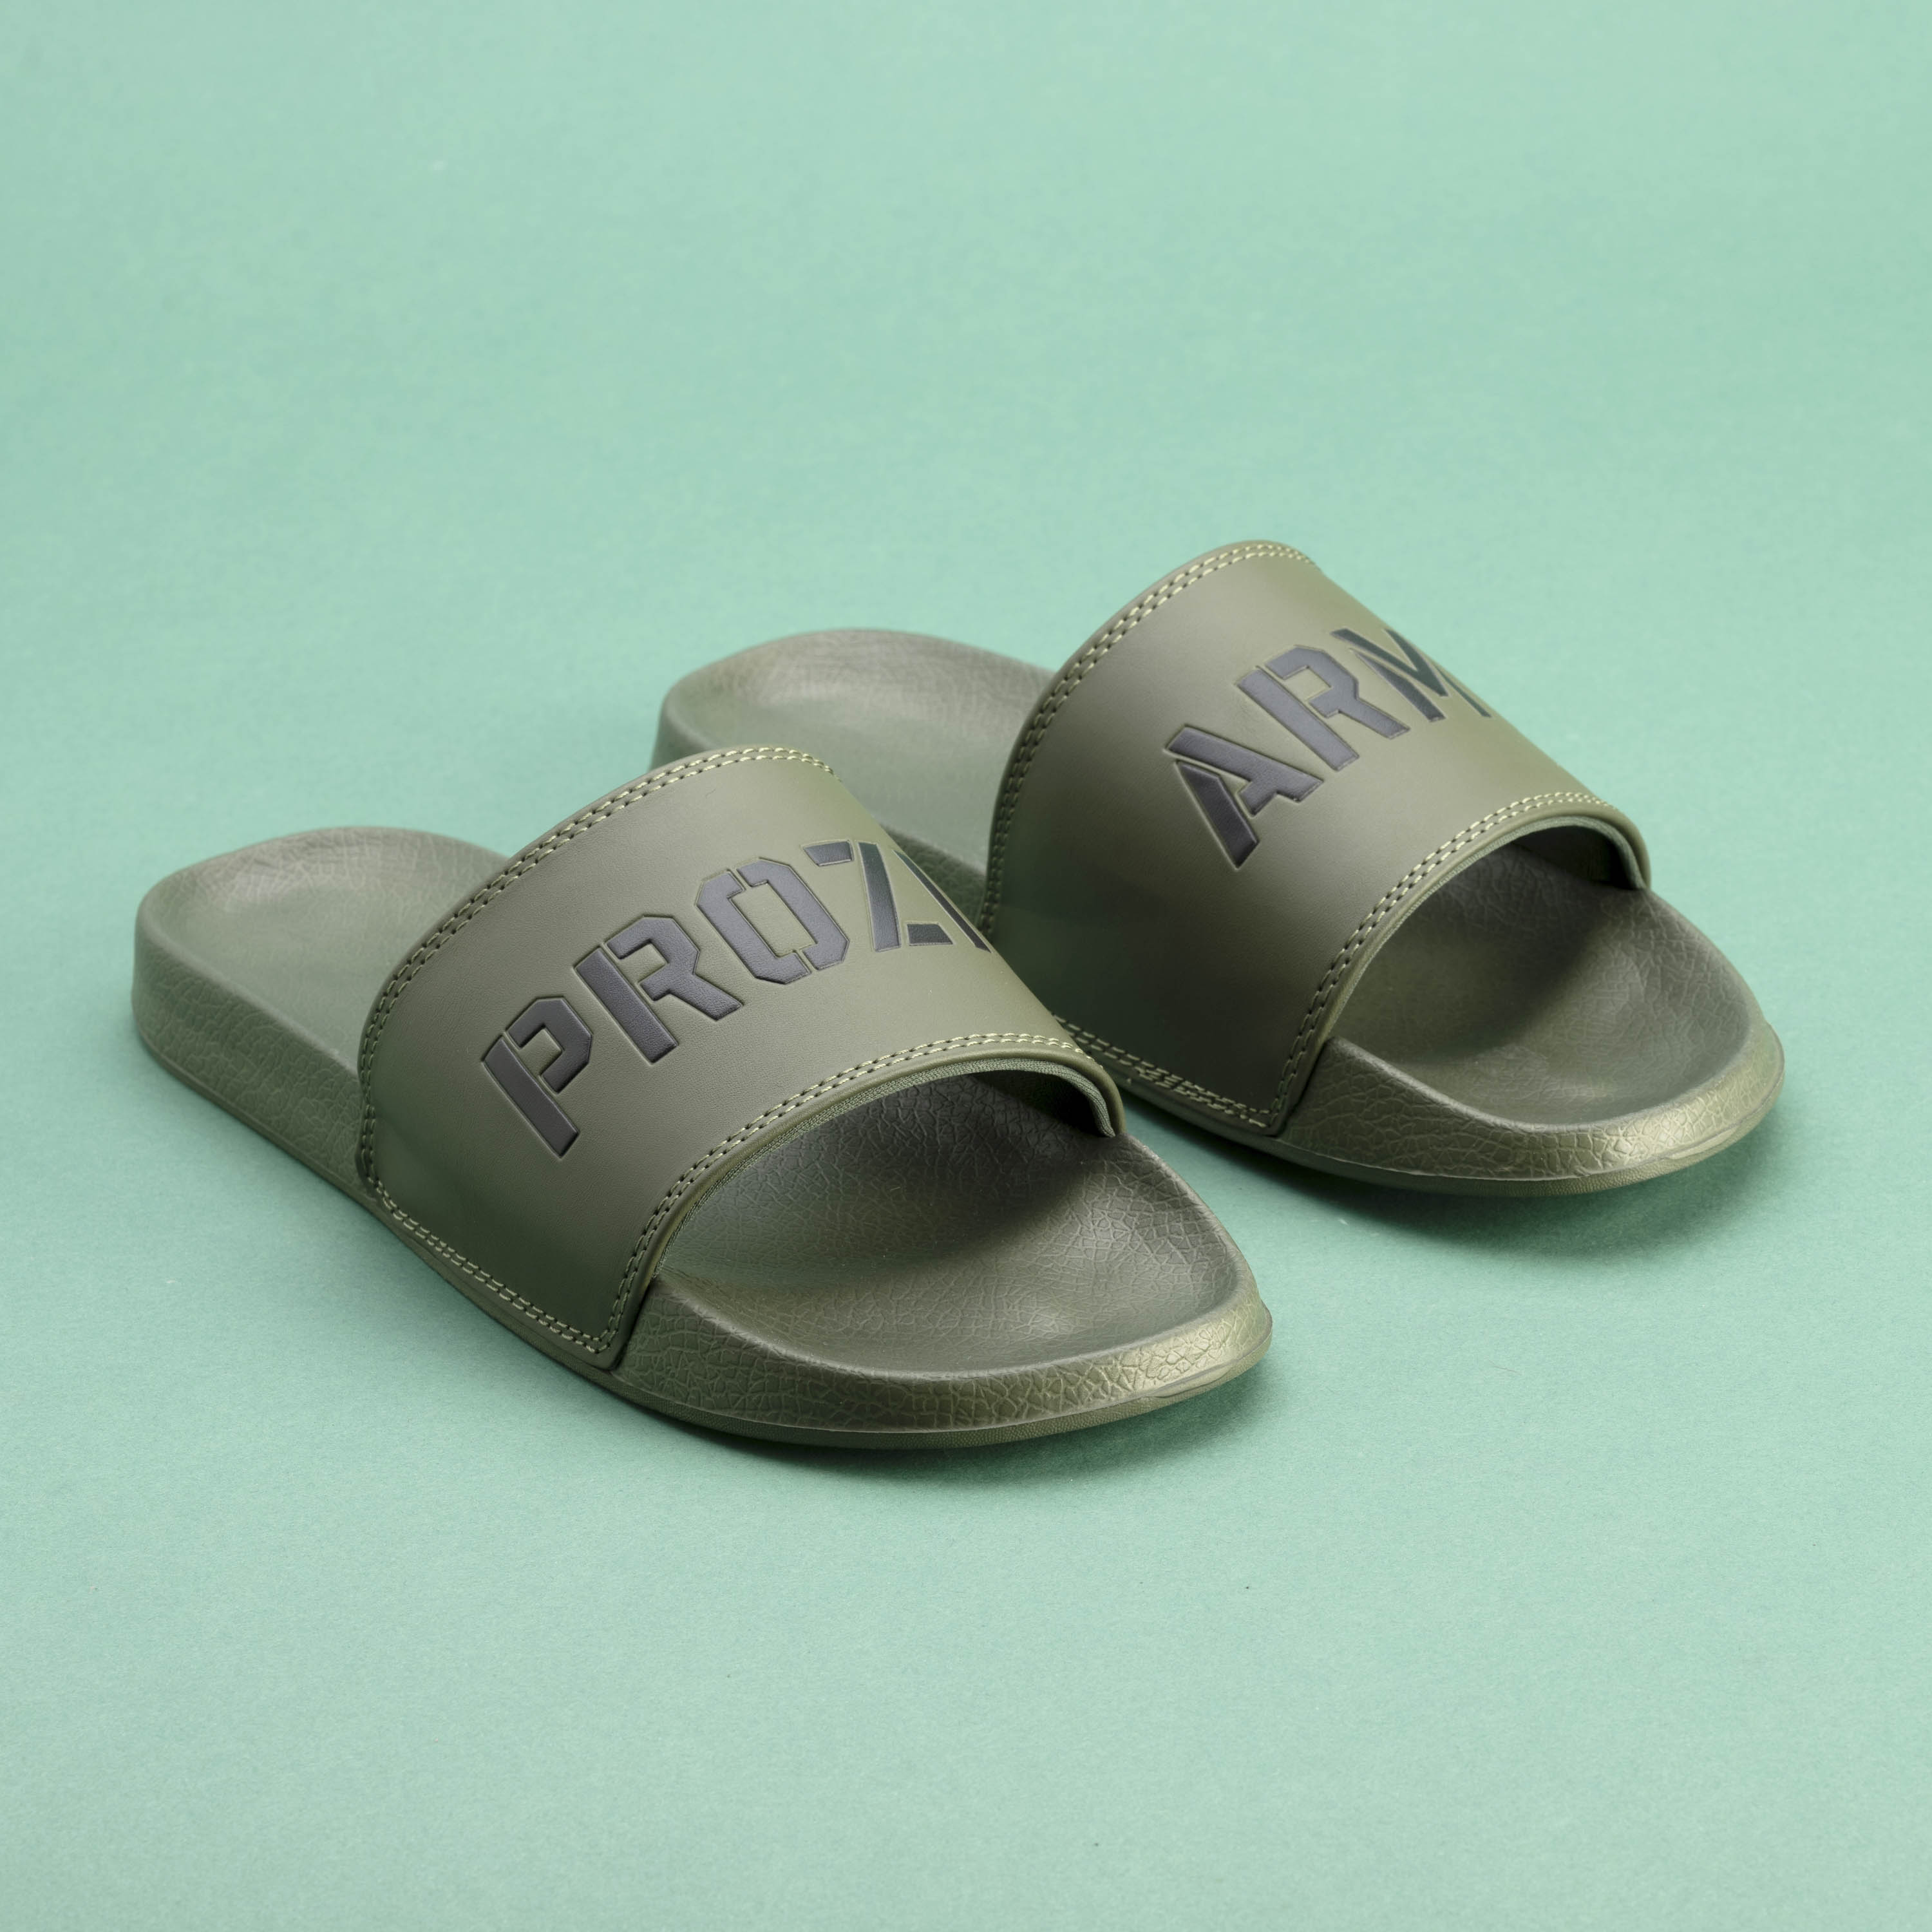 Army Slide Sandals - Green - Clothing 